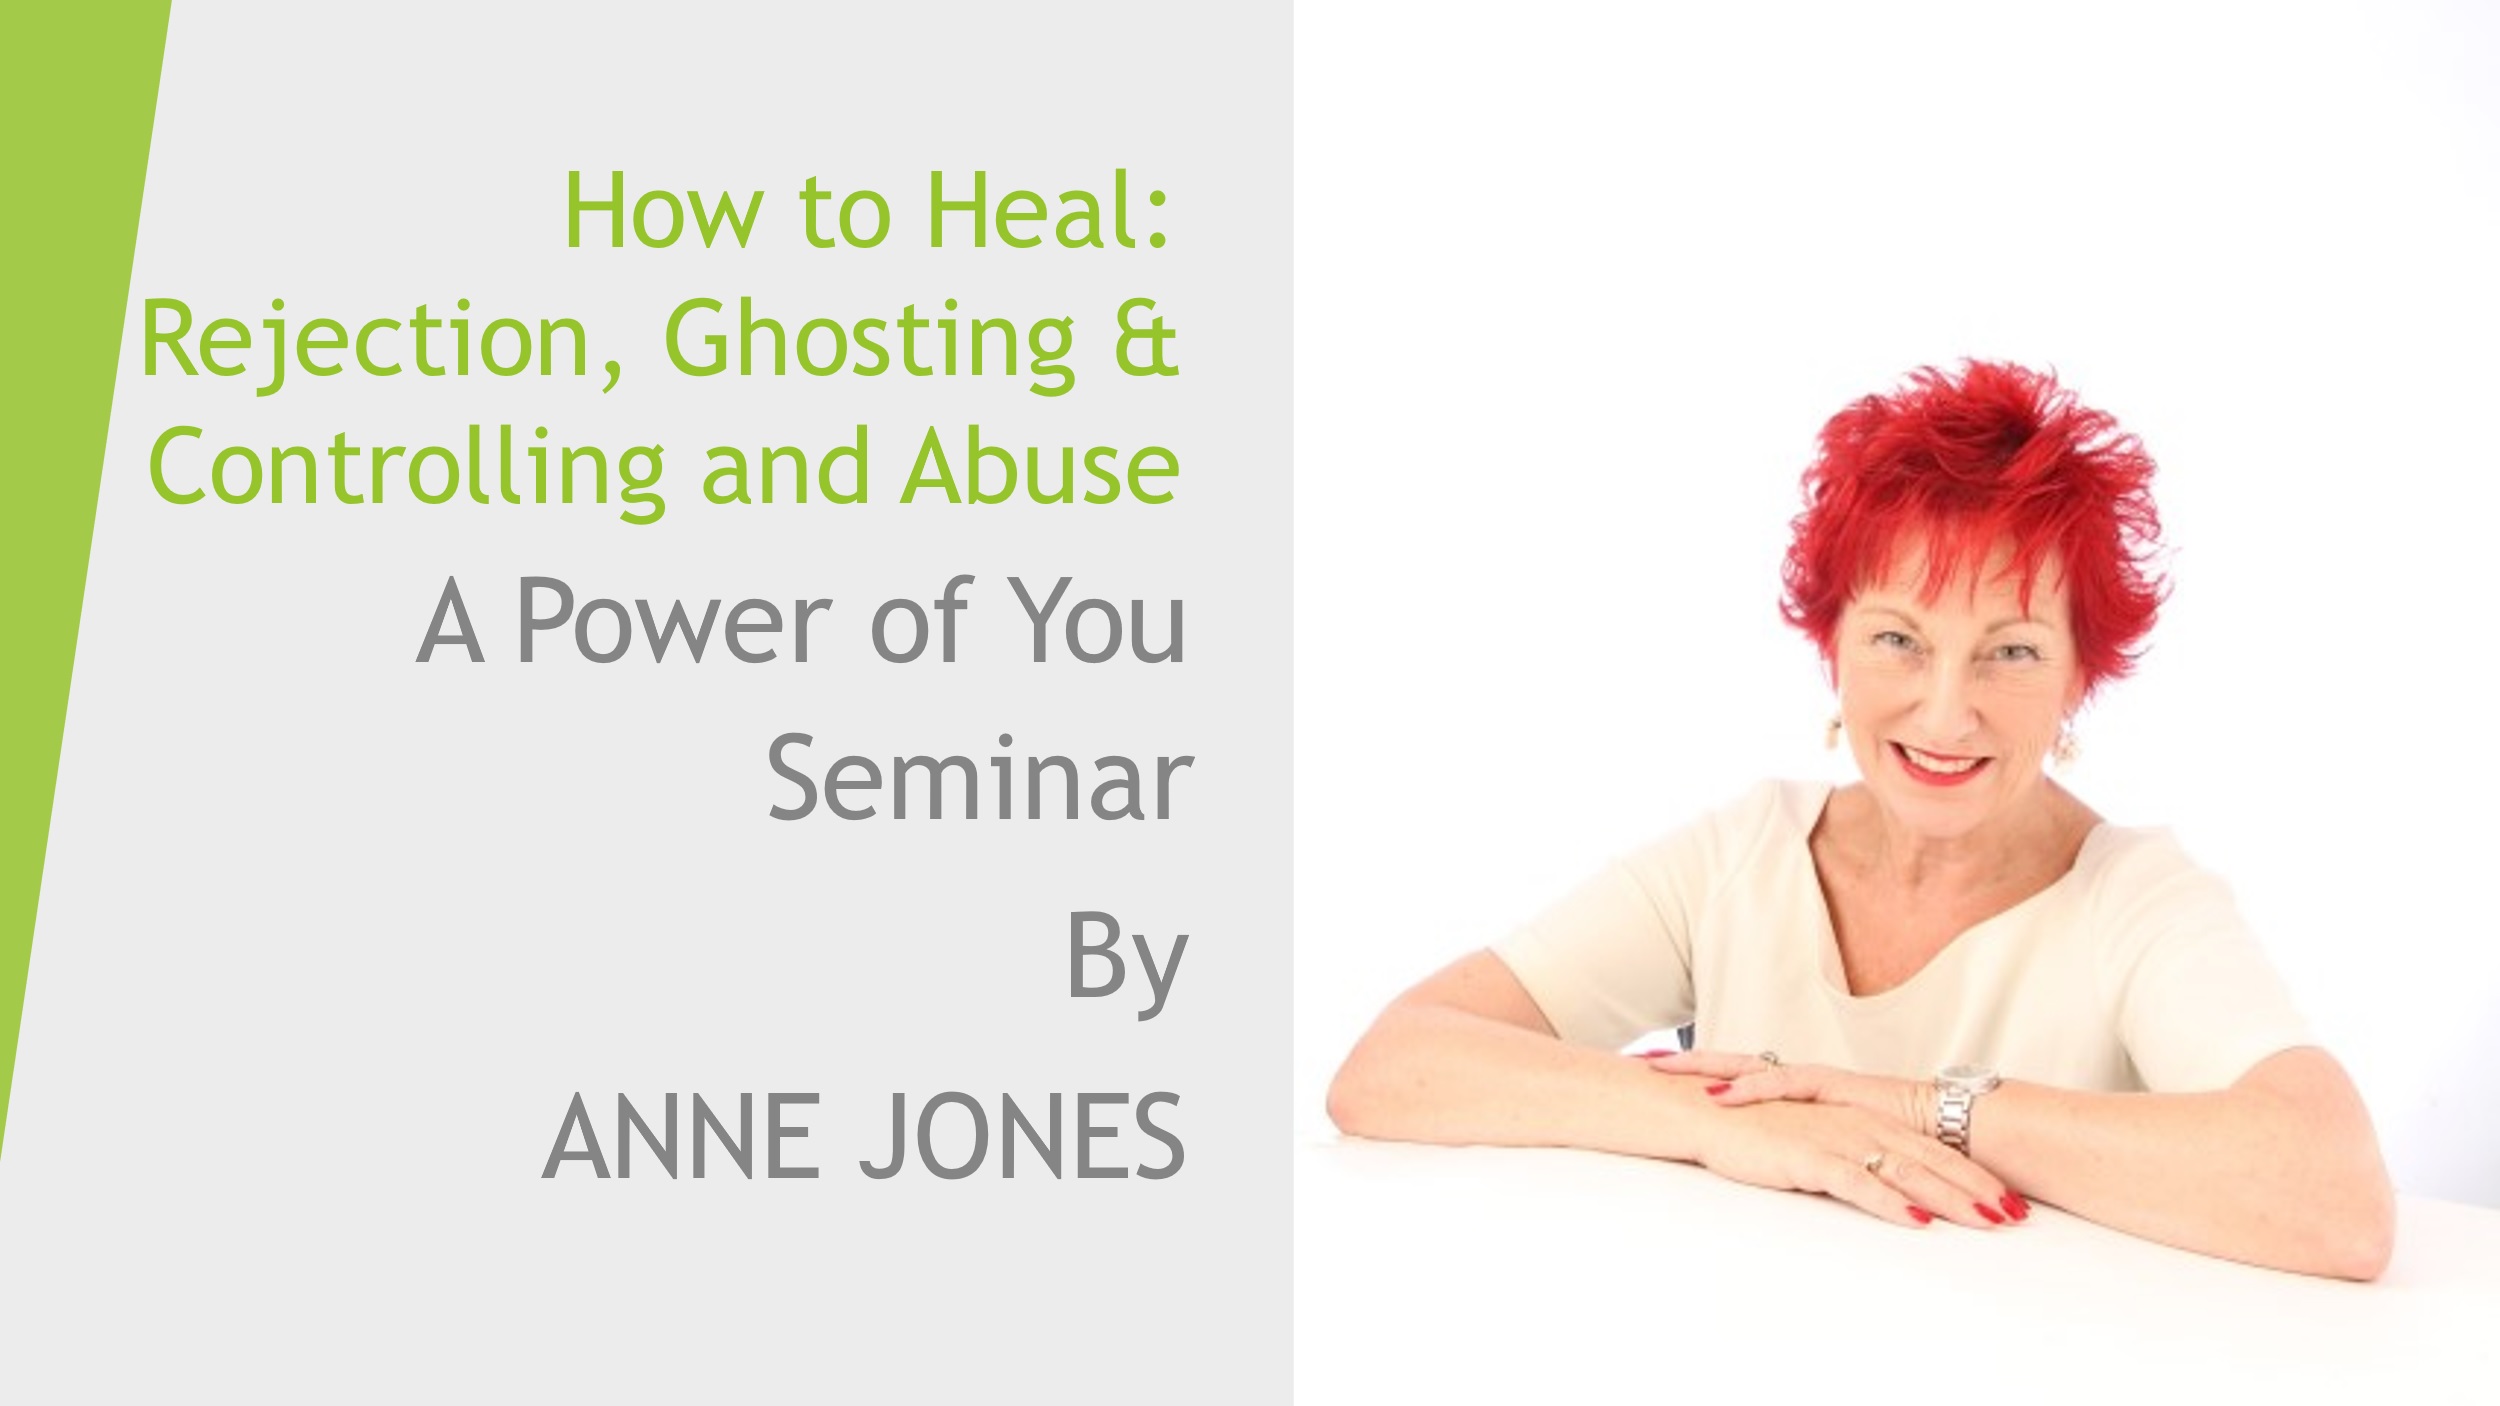 How to Heal: Rejection, Ghosting, Controlling & Abuse